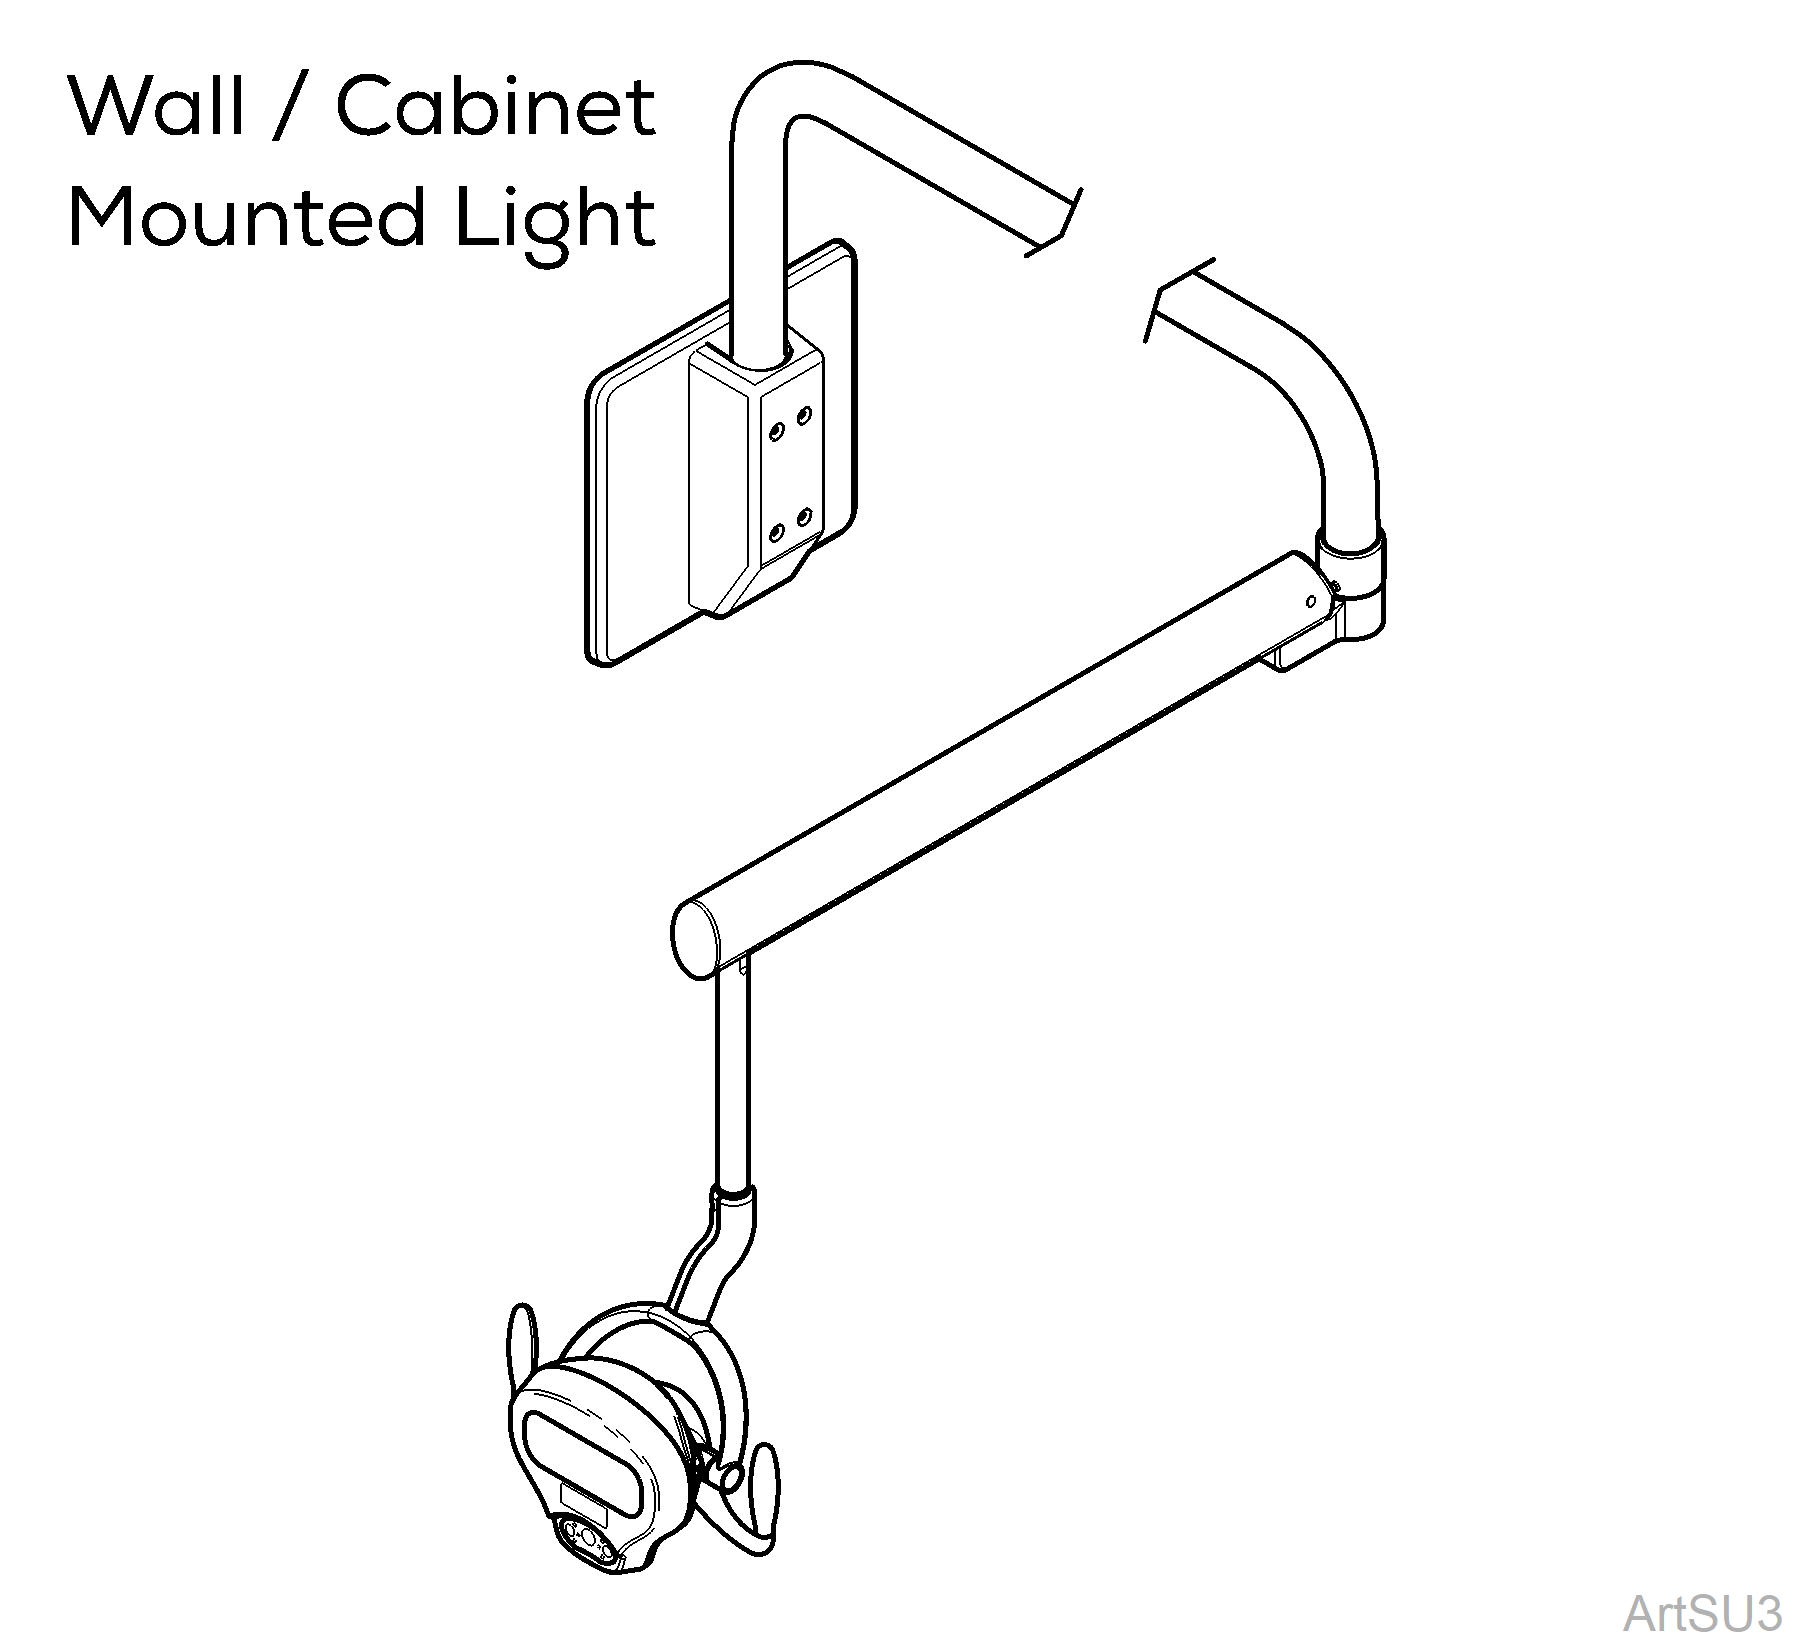 Wall / Cabinet Mounted LED Light